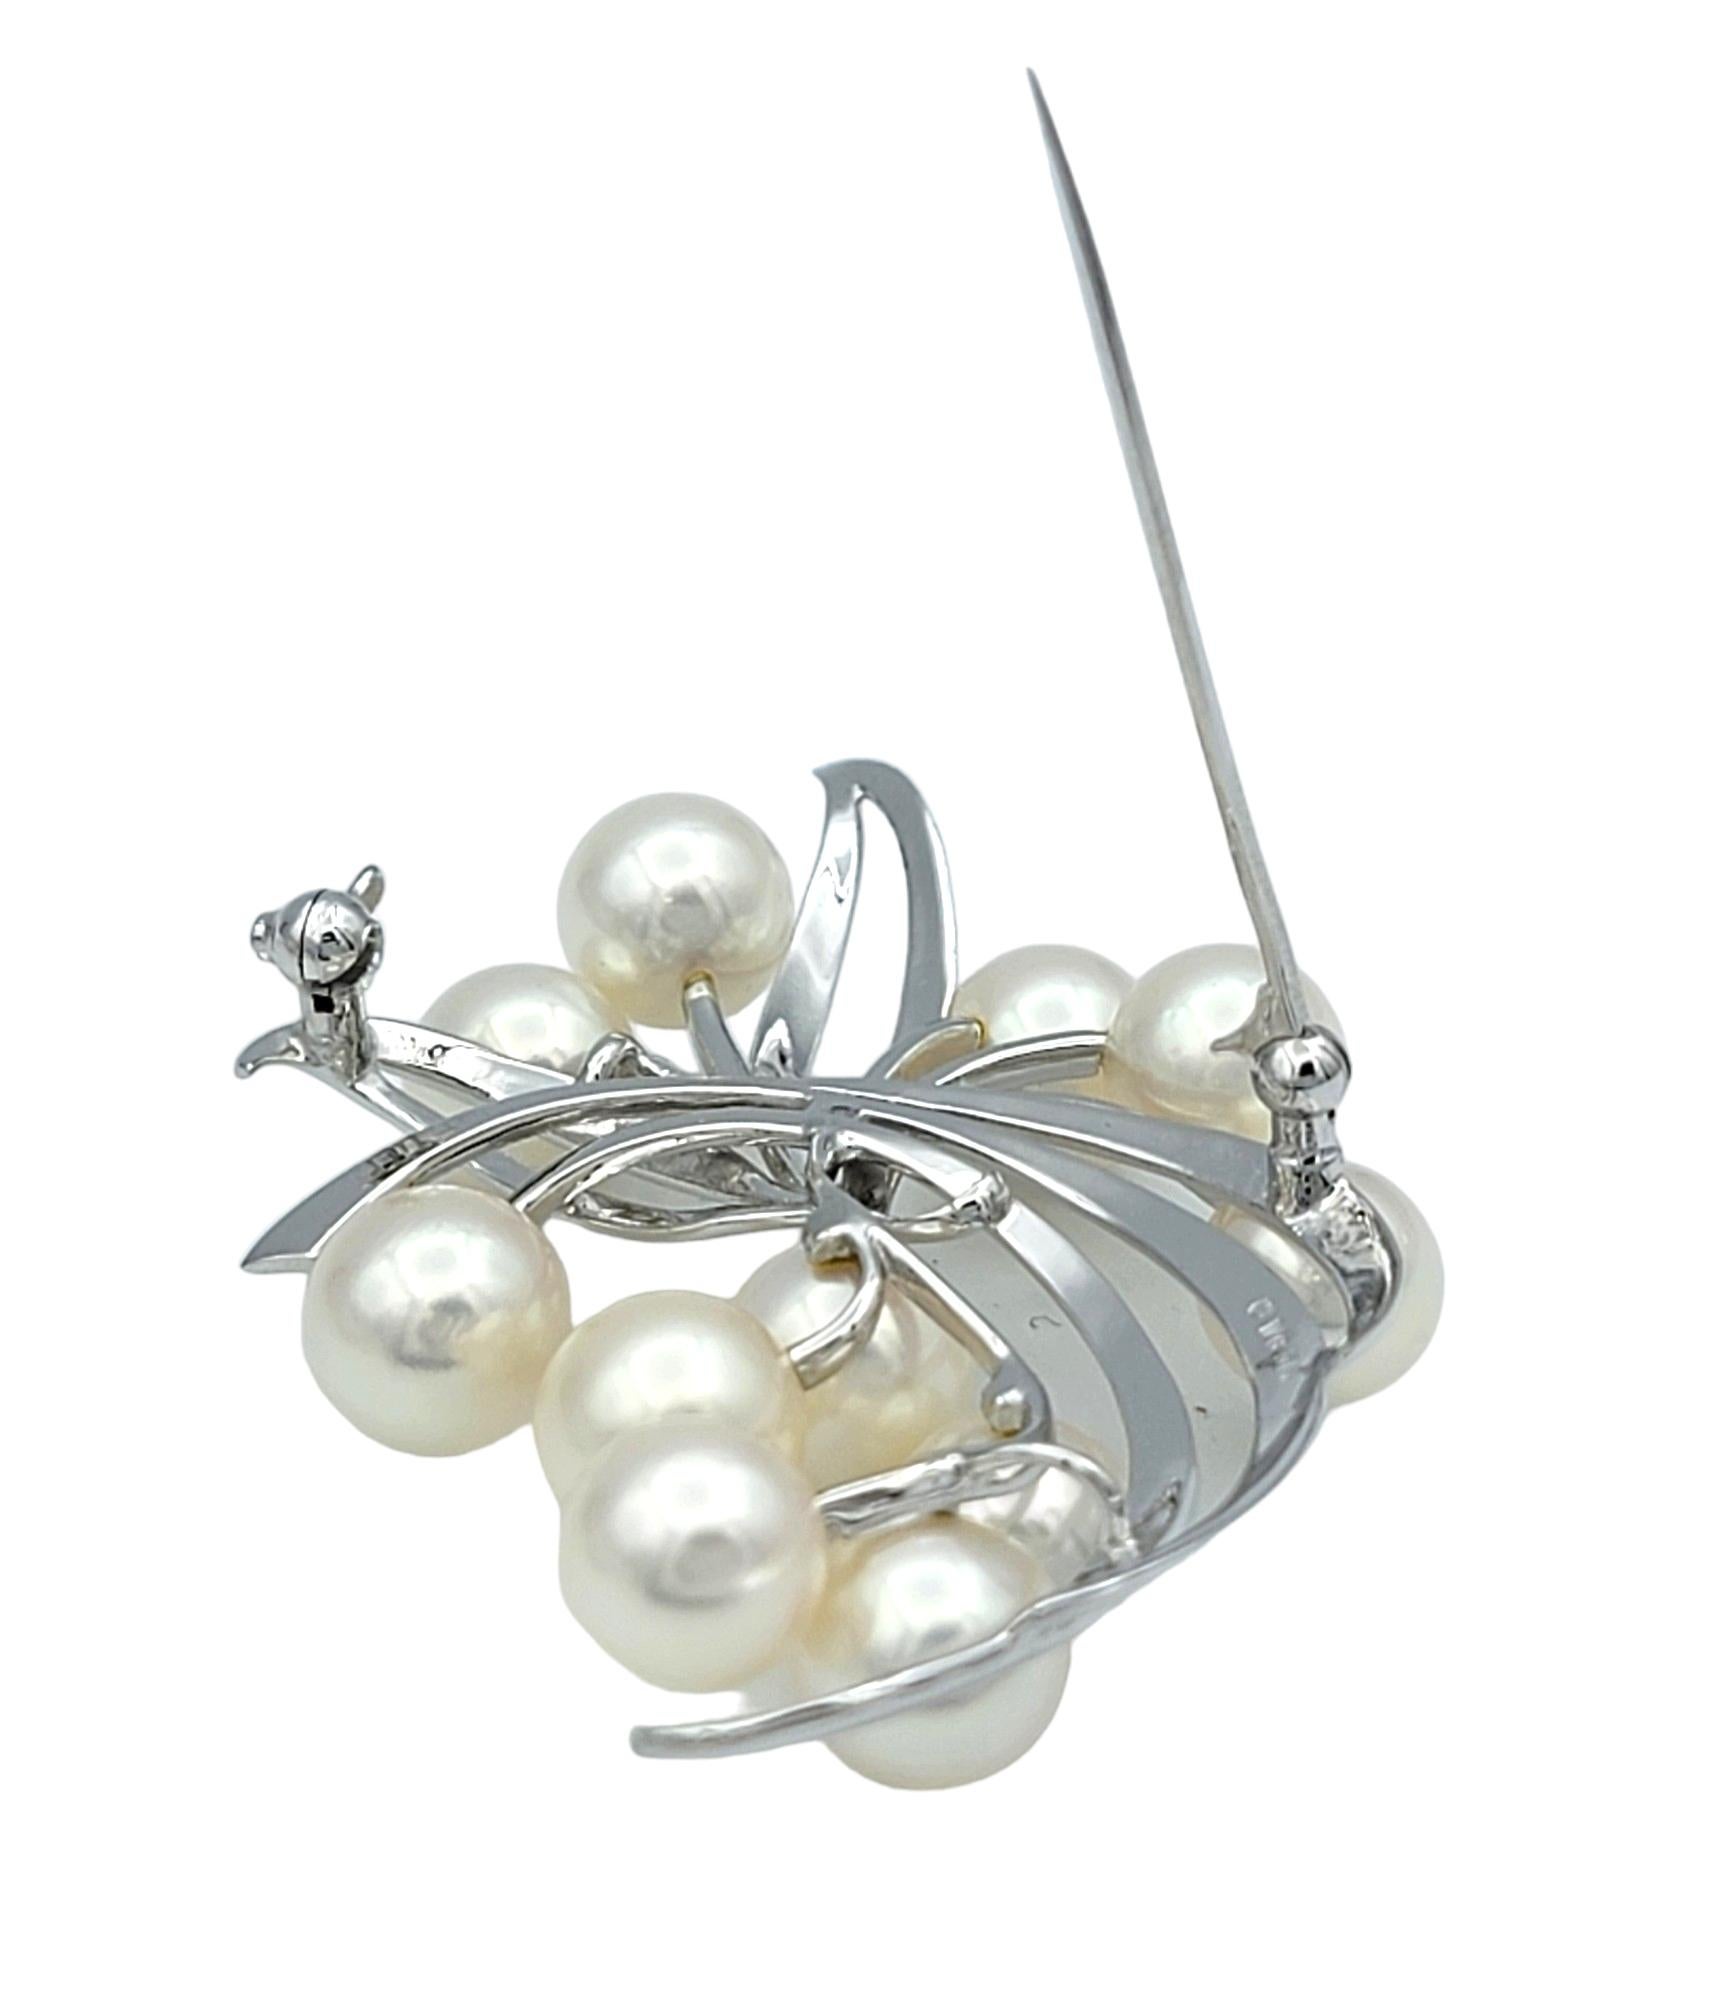 Mikimoto White Akoya Cultured Pearl Spray Brooch Set in 14 Karat White Gold In Good Condition For Sale In Scottsdale, AZ